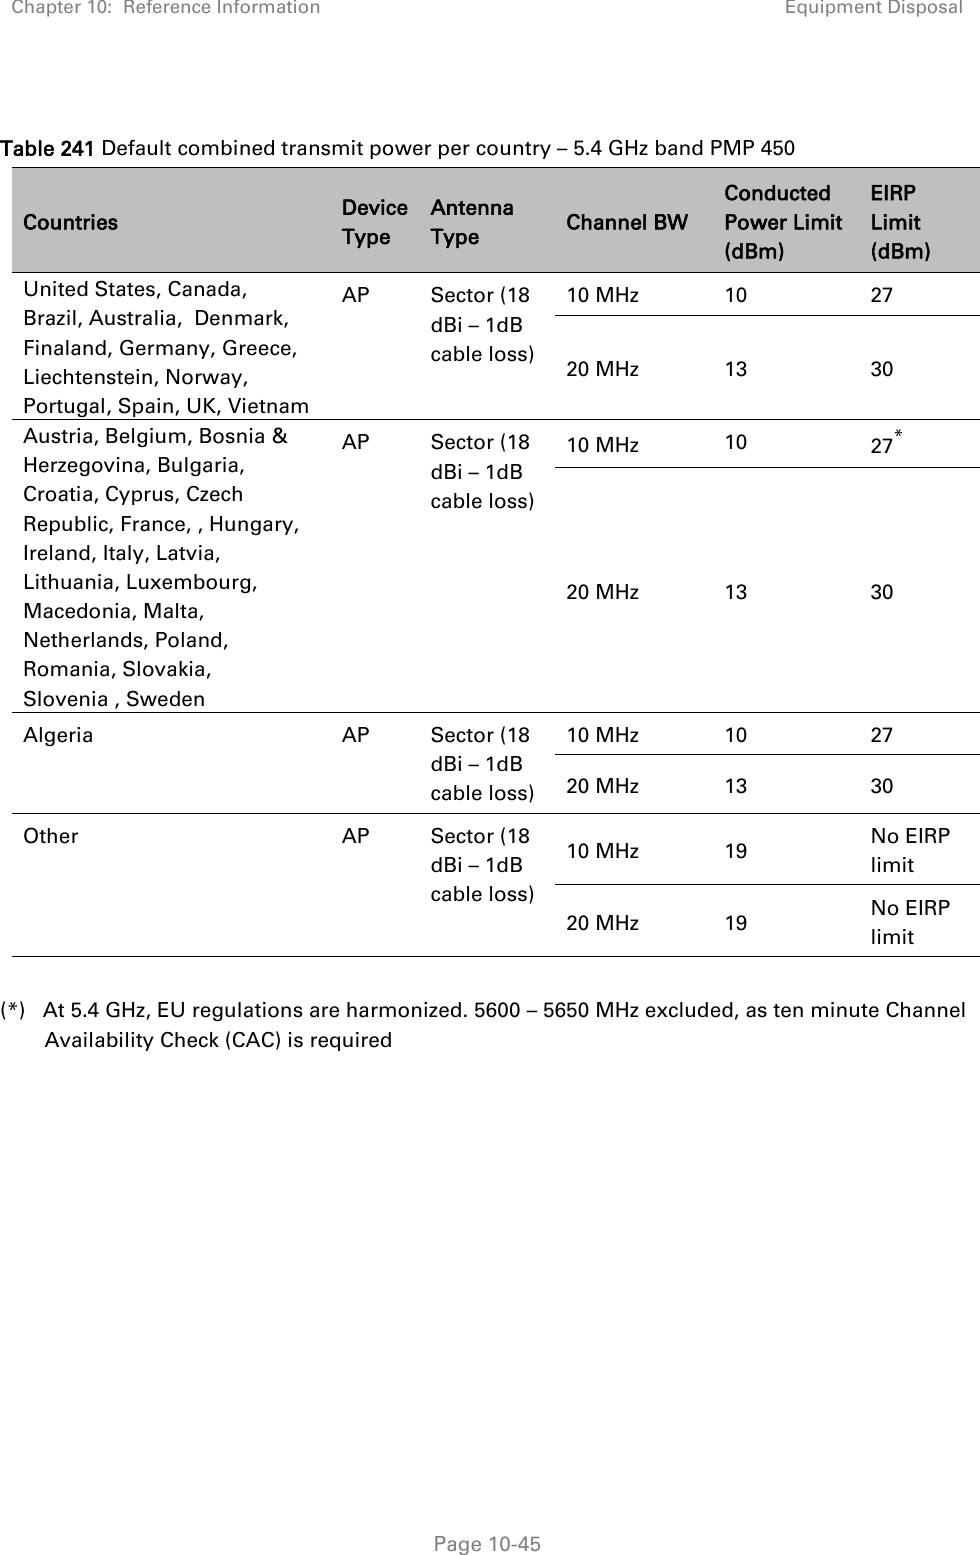 Chapter 10:  Reference Information Equipment Disposal   Page 10-45  Table 241 Default combined transmit power per country – 5.4 GHz band PMP 450 Countries Device Type Antenna Type Channel BW Conducted Power Limit (dBm) EIRP Limit (dBm) United States, Canada, Brazil, Australia,  Denmark, Finaland, Germany, Greece, Liechtenstein, Norway, Portugal, Spain, UK, Vietnam AP Sector (18 dBi – 1dB cable loss) 10 MHz 10 27 20 MHz 13 30 Austria, Belgium, Bosnia &amp; Herzegovina, Bulgaria, Croatia, Cyprus, Czech Republic, France, , Hungary, Ireland, Italy, Latvia, Lithuania, Luxembourg, Macedonia, Malta, Netherlands, Poland, Romania, Slovakia, Slovenia , Sweden AP Sector (18 dBi – 1dB cable loss) 10 MHz 10 27* 20 MHz 13 30 Algeria AP Sector (18 dBi – 1dB cable loss) 10 MHz 10 27 20 MHz 13 30 Other AP Sector (18 dBi – 1dB cable loss) 10 MHz 19 No EIRP limit 20 MHz 19 No EIRP  limit  (*)   At 5.4 GHz, EU regulations are harmonized. 5600 – 5650 MHz excluded, as ten minute Channel Availability Check (CAC) is required    